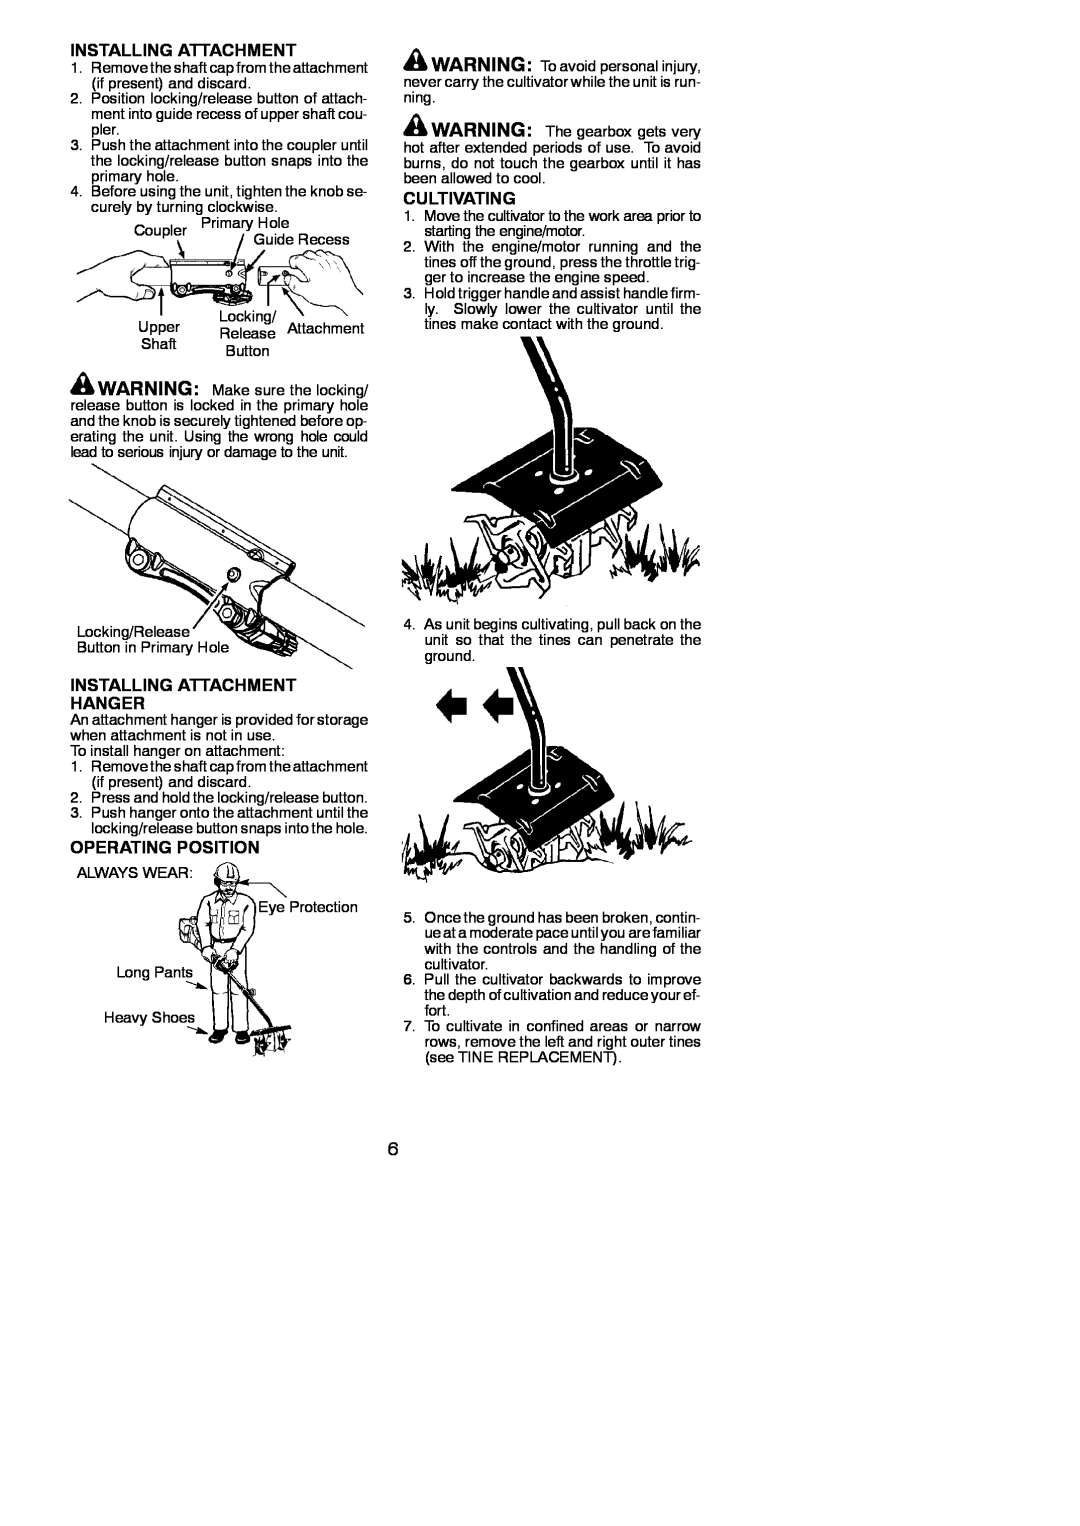 Poulan 952711826, 545212826 instruction manual Installing Attachment Hanger, Operating Position, Cultivating 